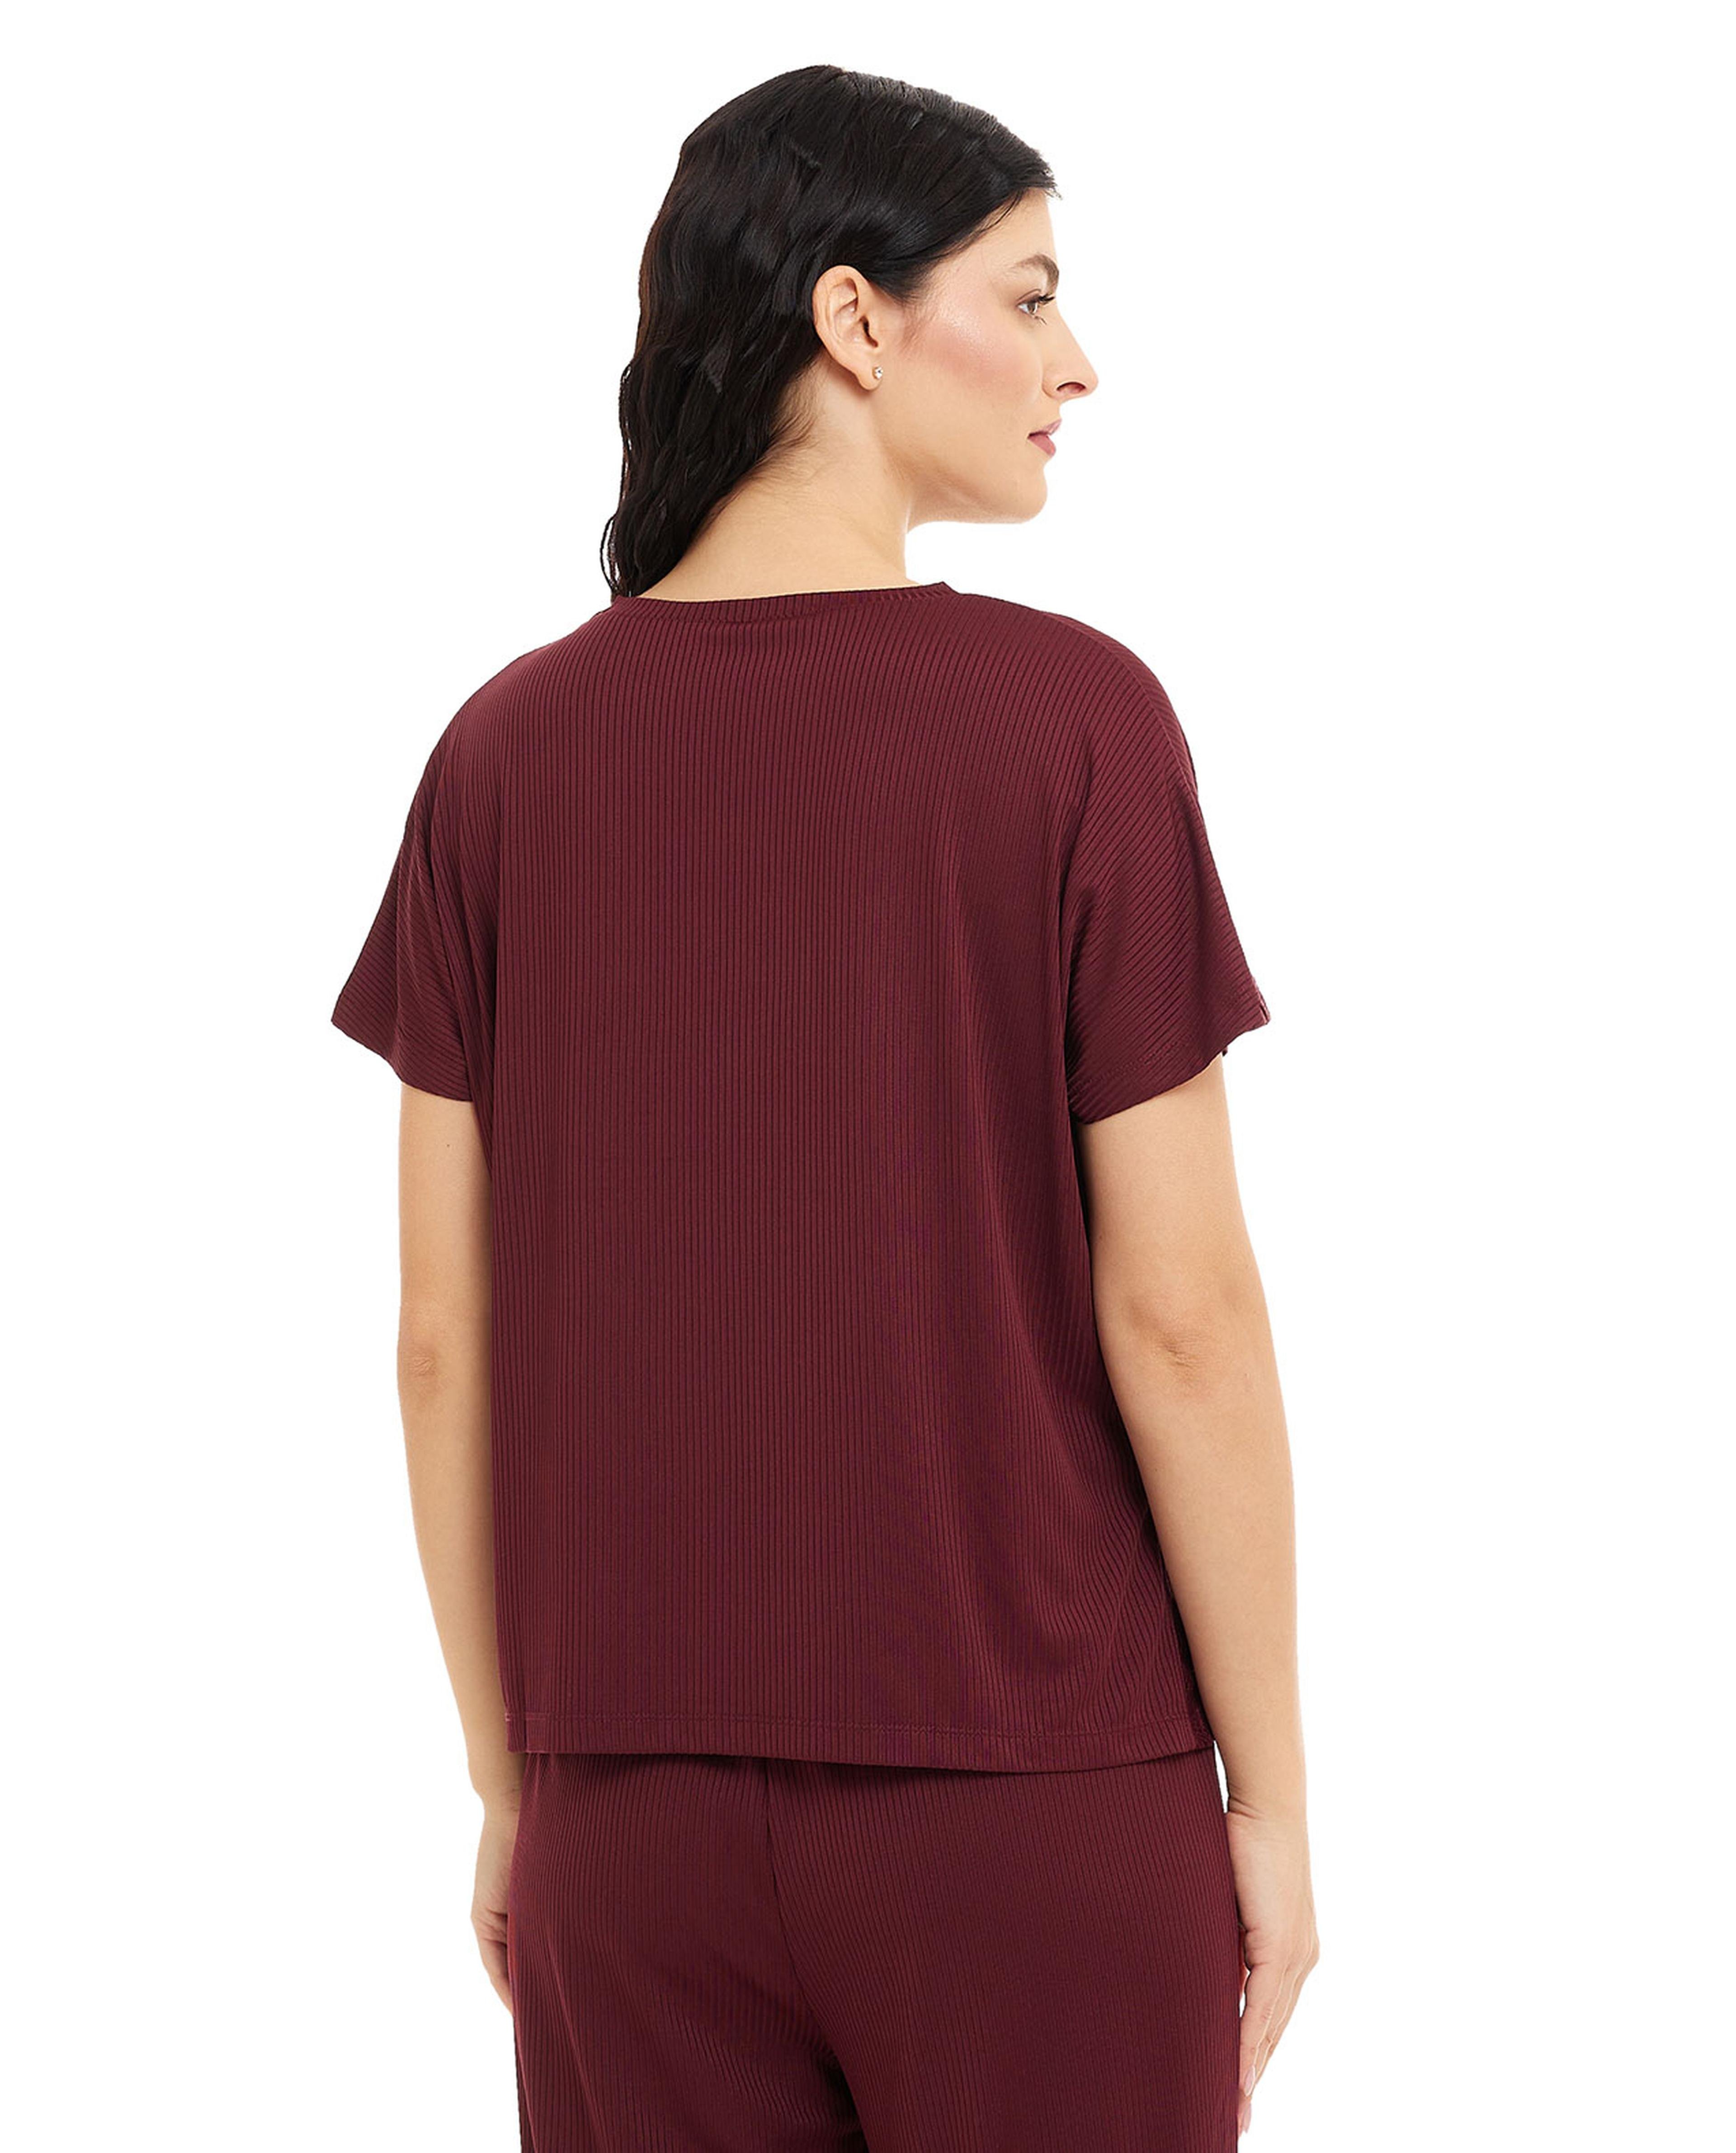 Solid Sleep Top with Crew Neck and Short Sleeves